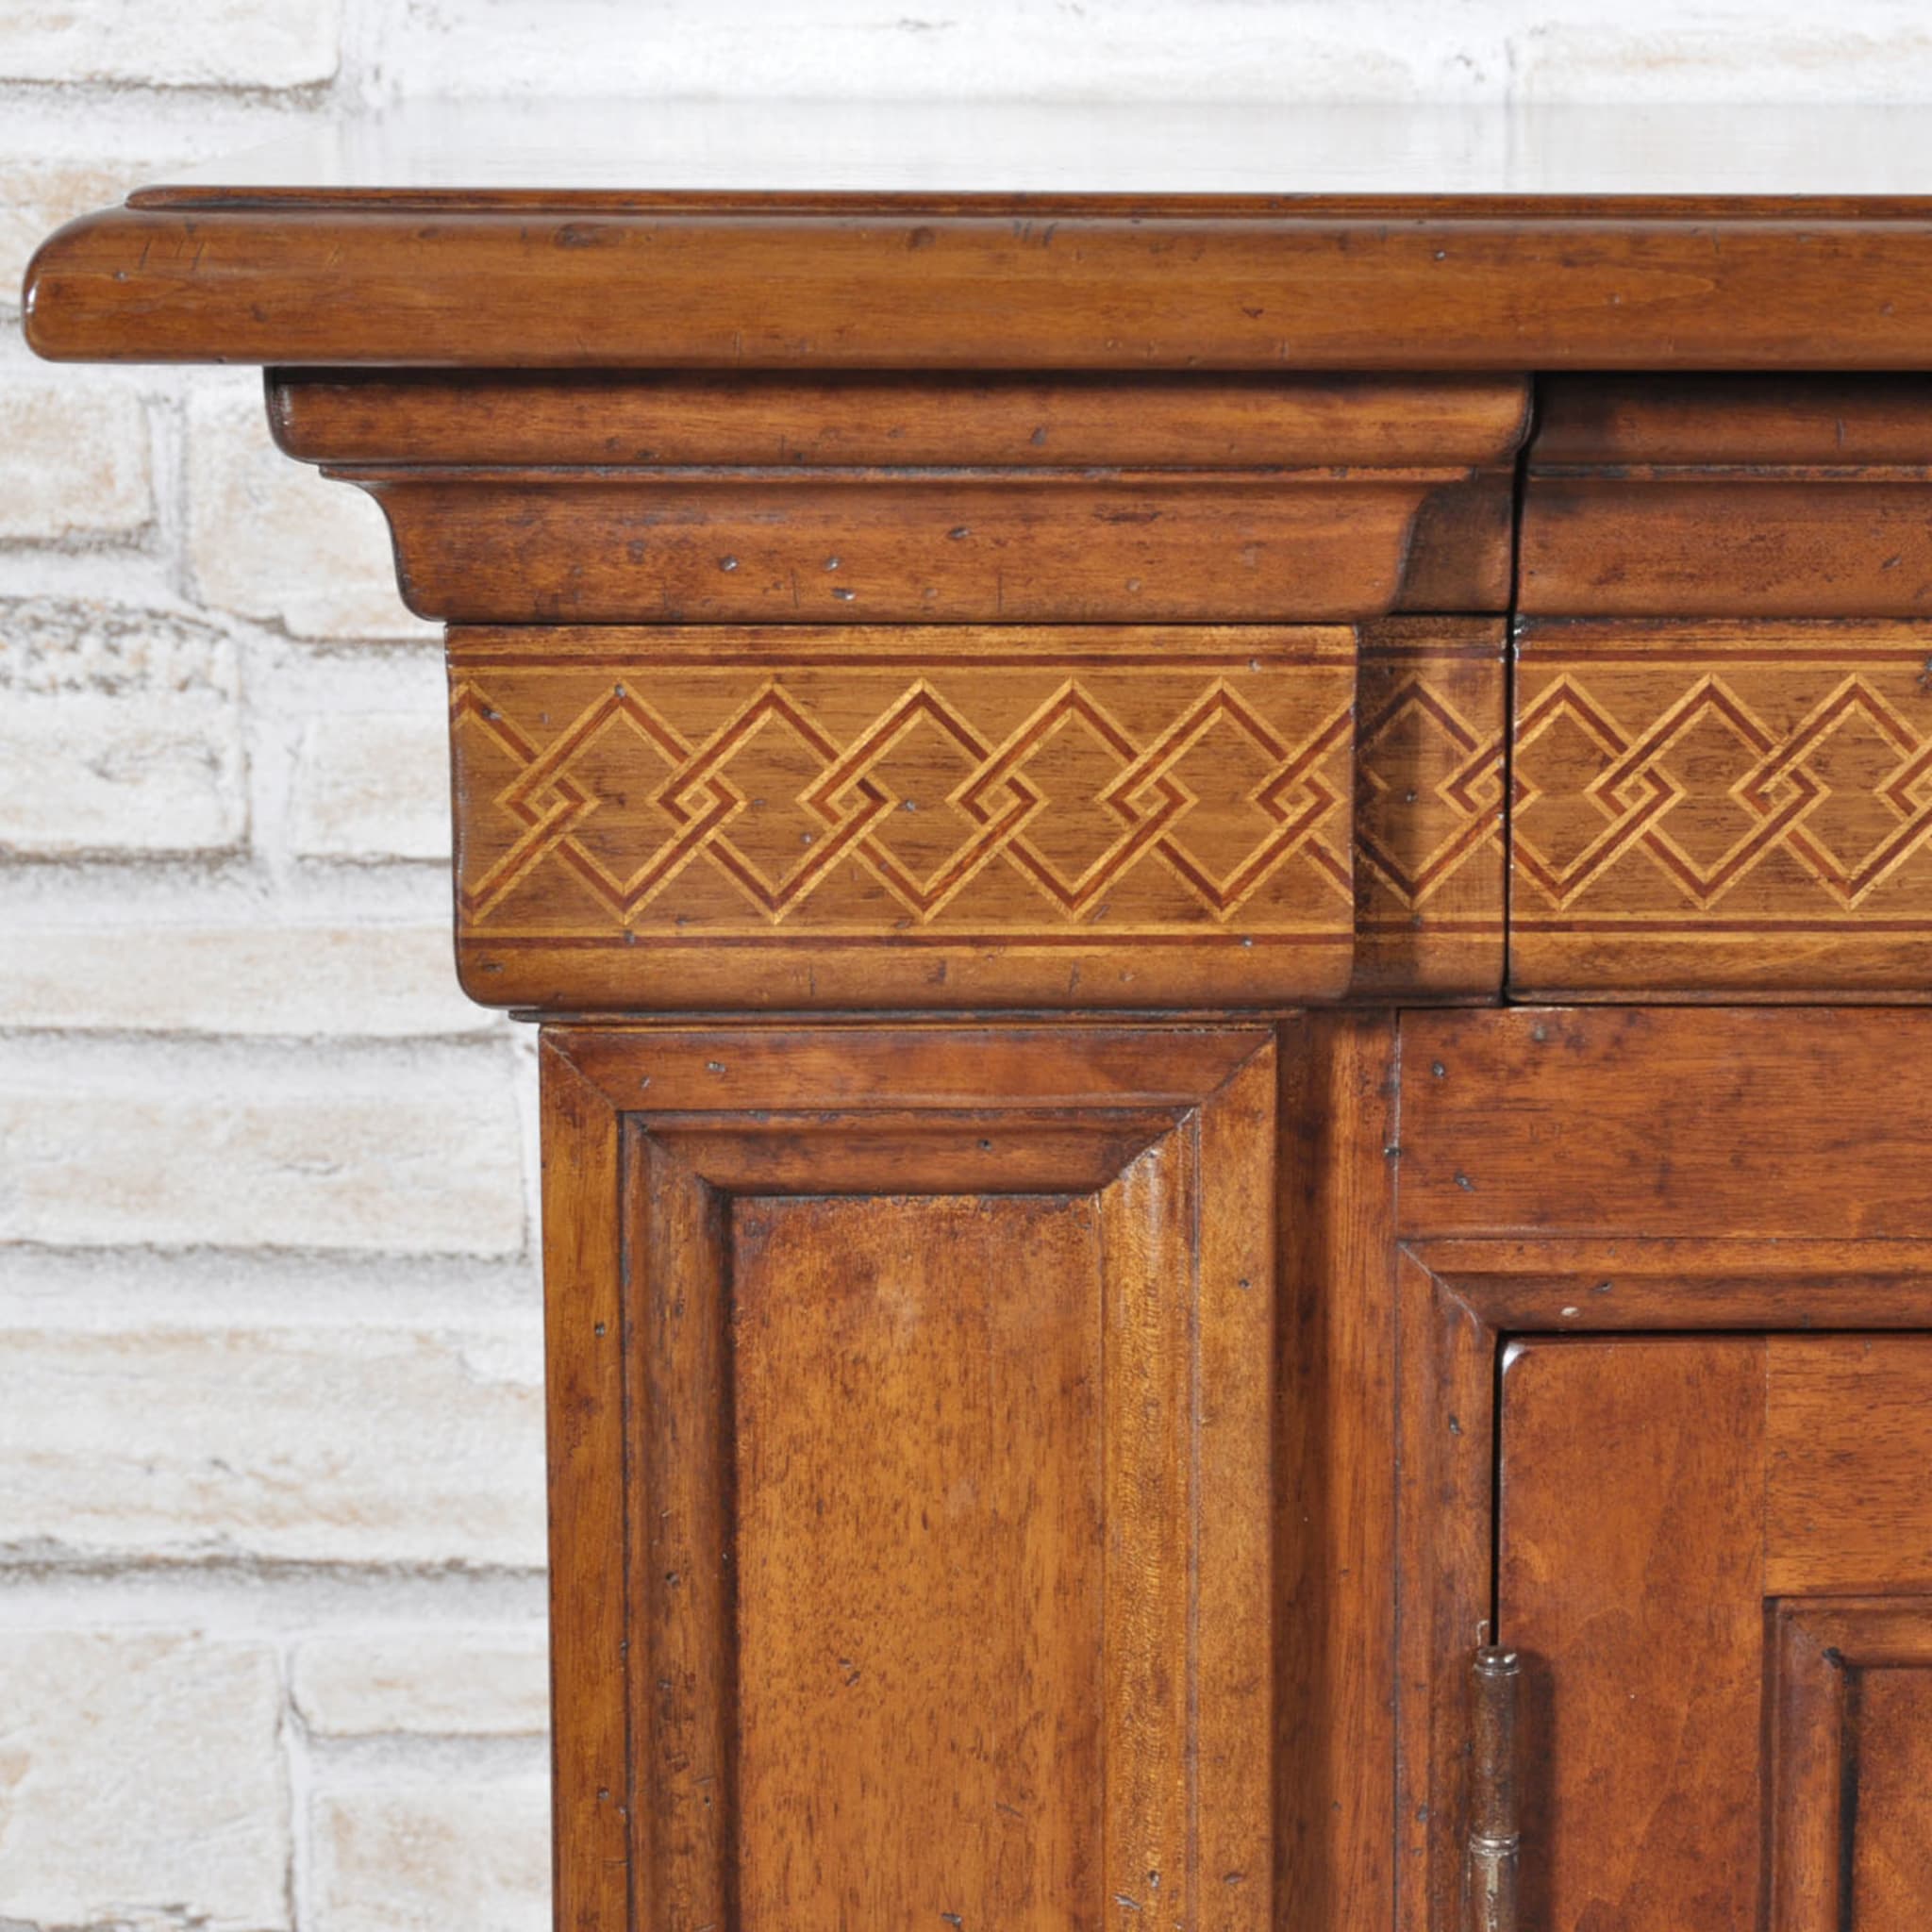 Toscano '500 Tuscan-Style Inlaid Sideboard - Alternative view 1